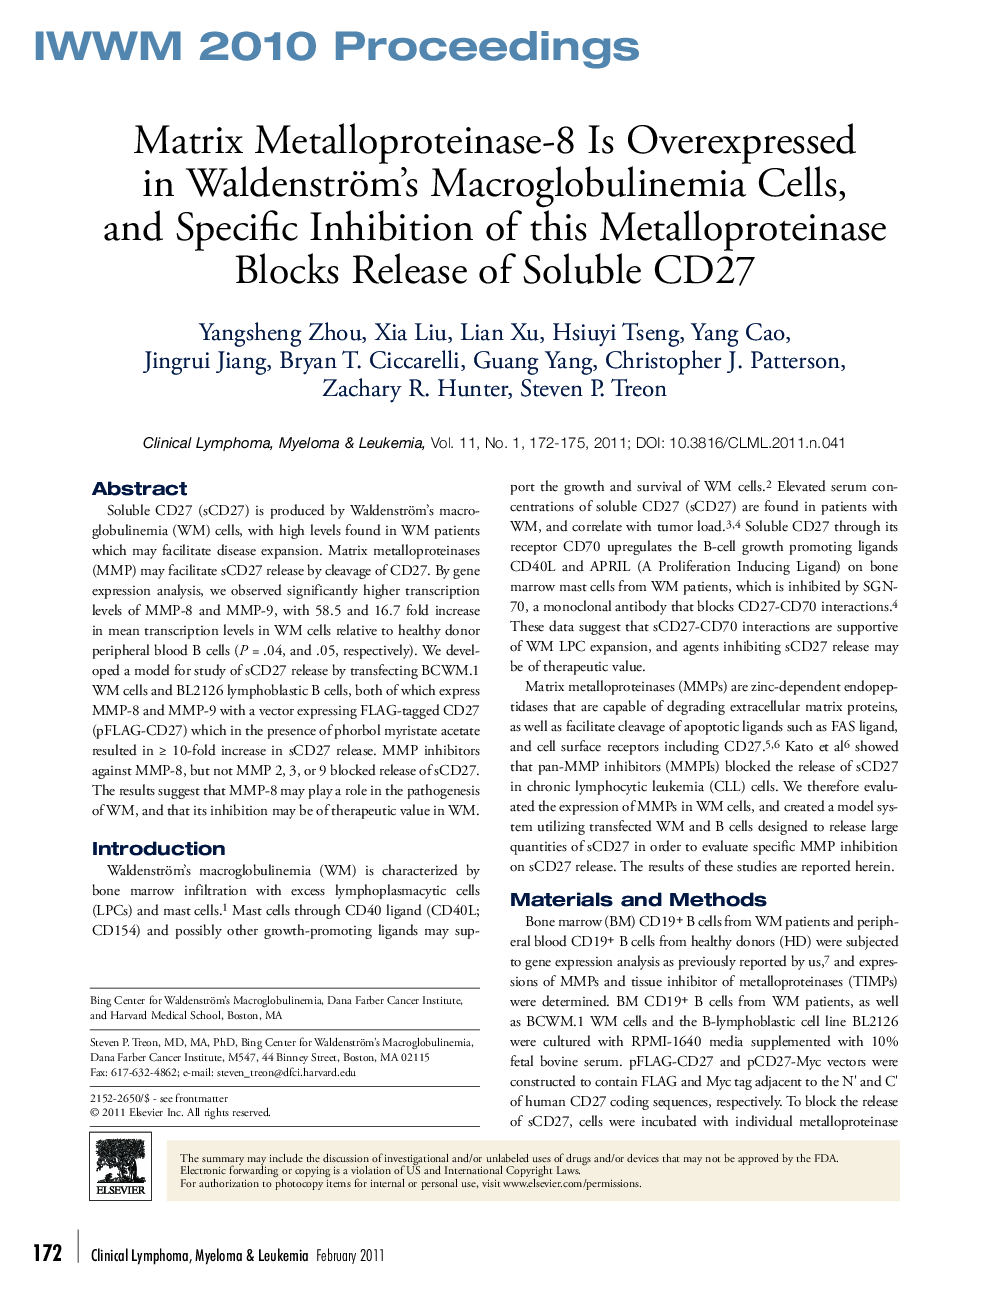 Matrix Metalloproteinase-8 Is Overexpressed in Waldenström's Macroglobulinemia Cells, and Specific Inhibition of this Metalloproteinase Blocks Release of Soluble CD27 